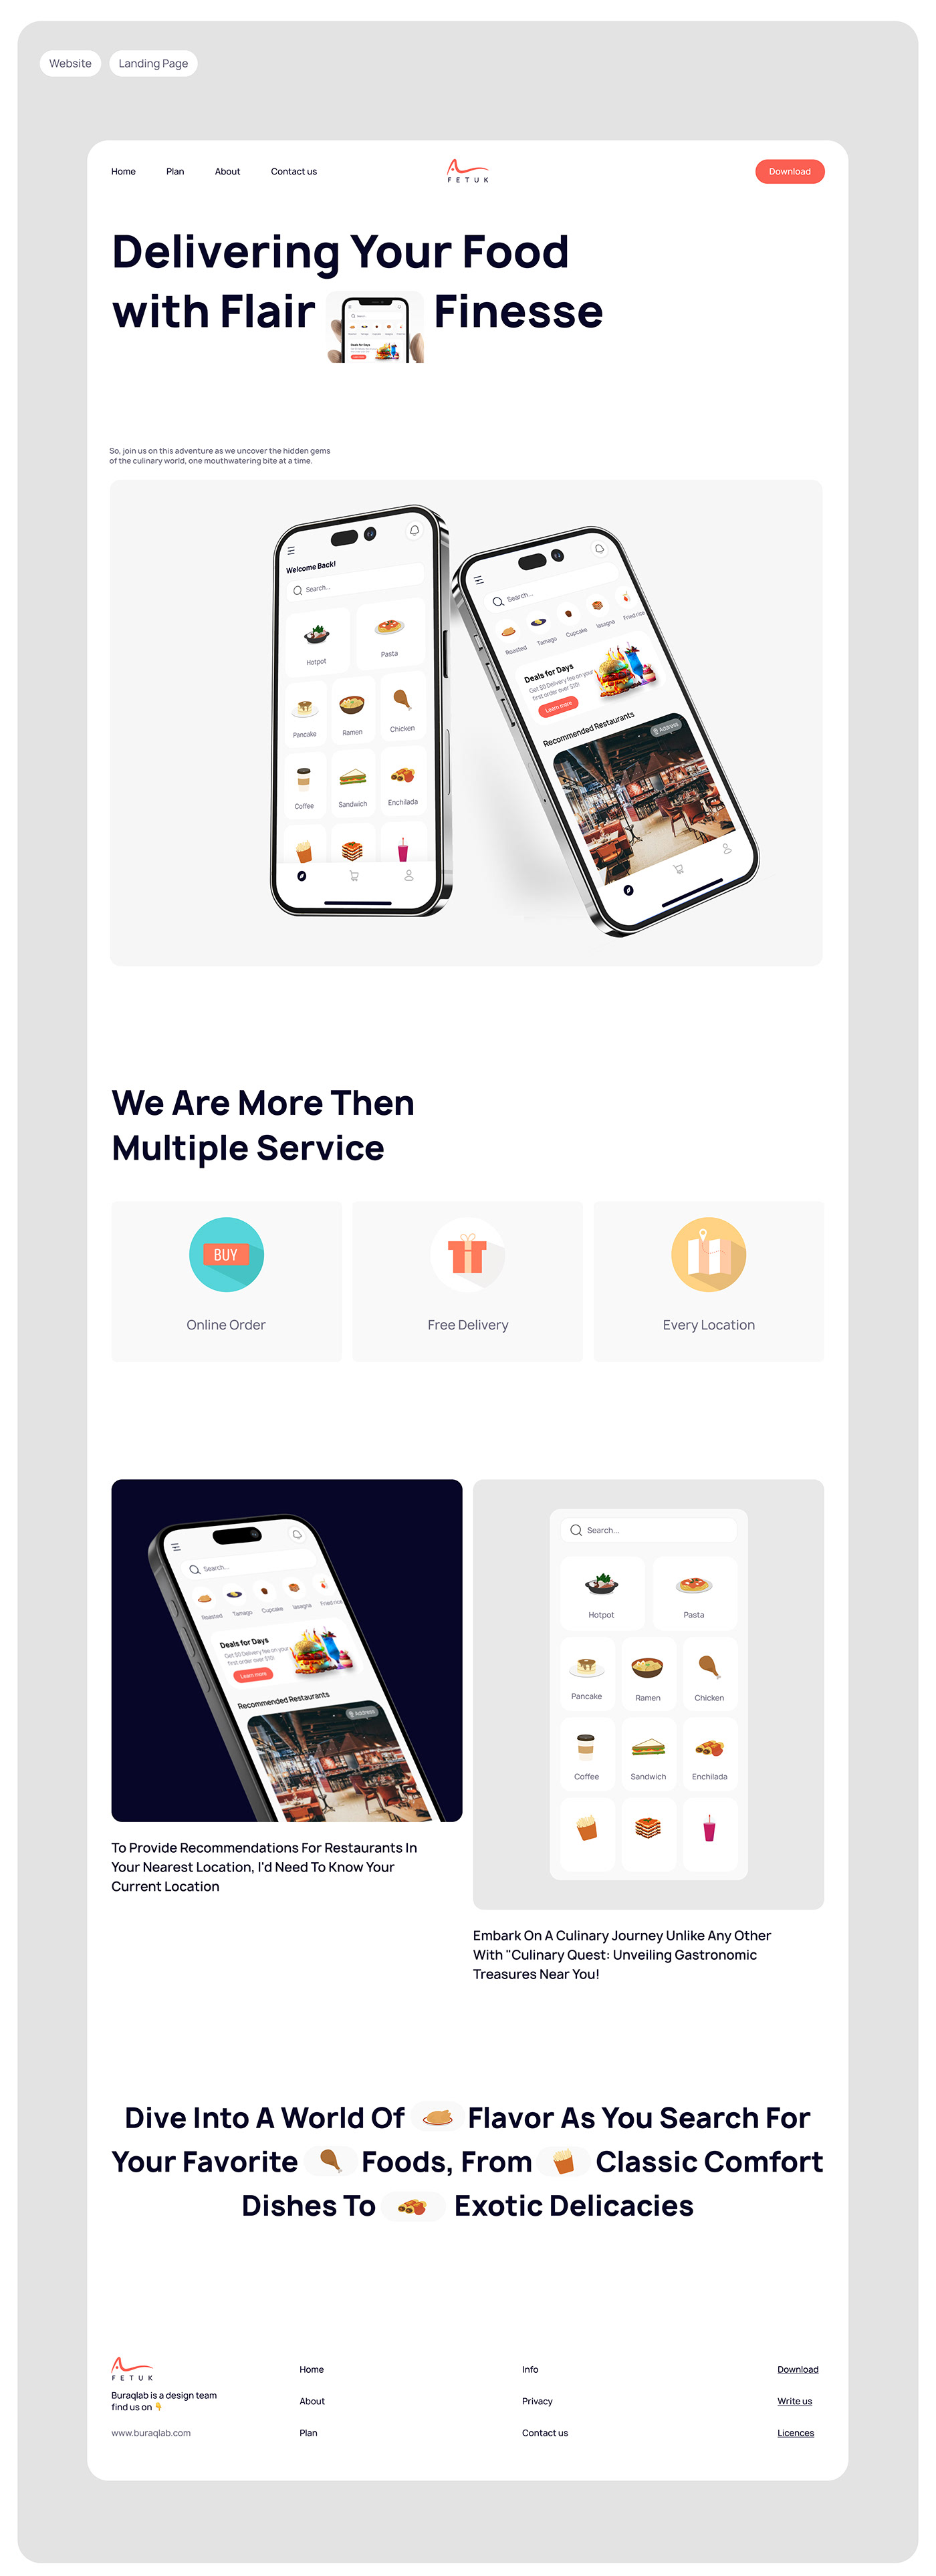 This is a mobile application design for Food delivery app. Landing page design
